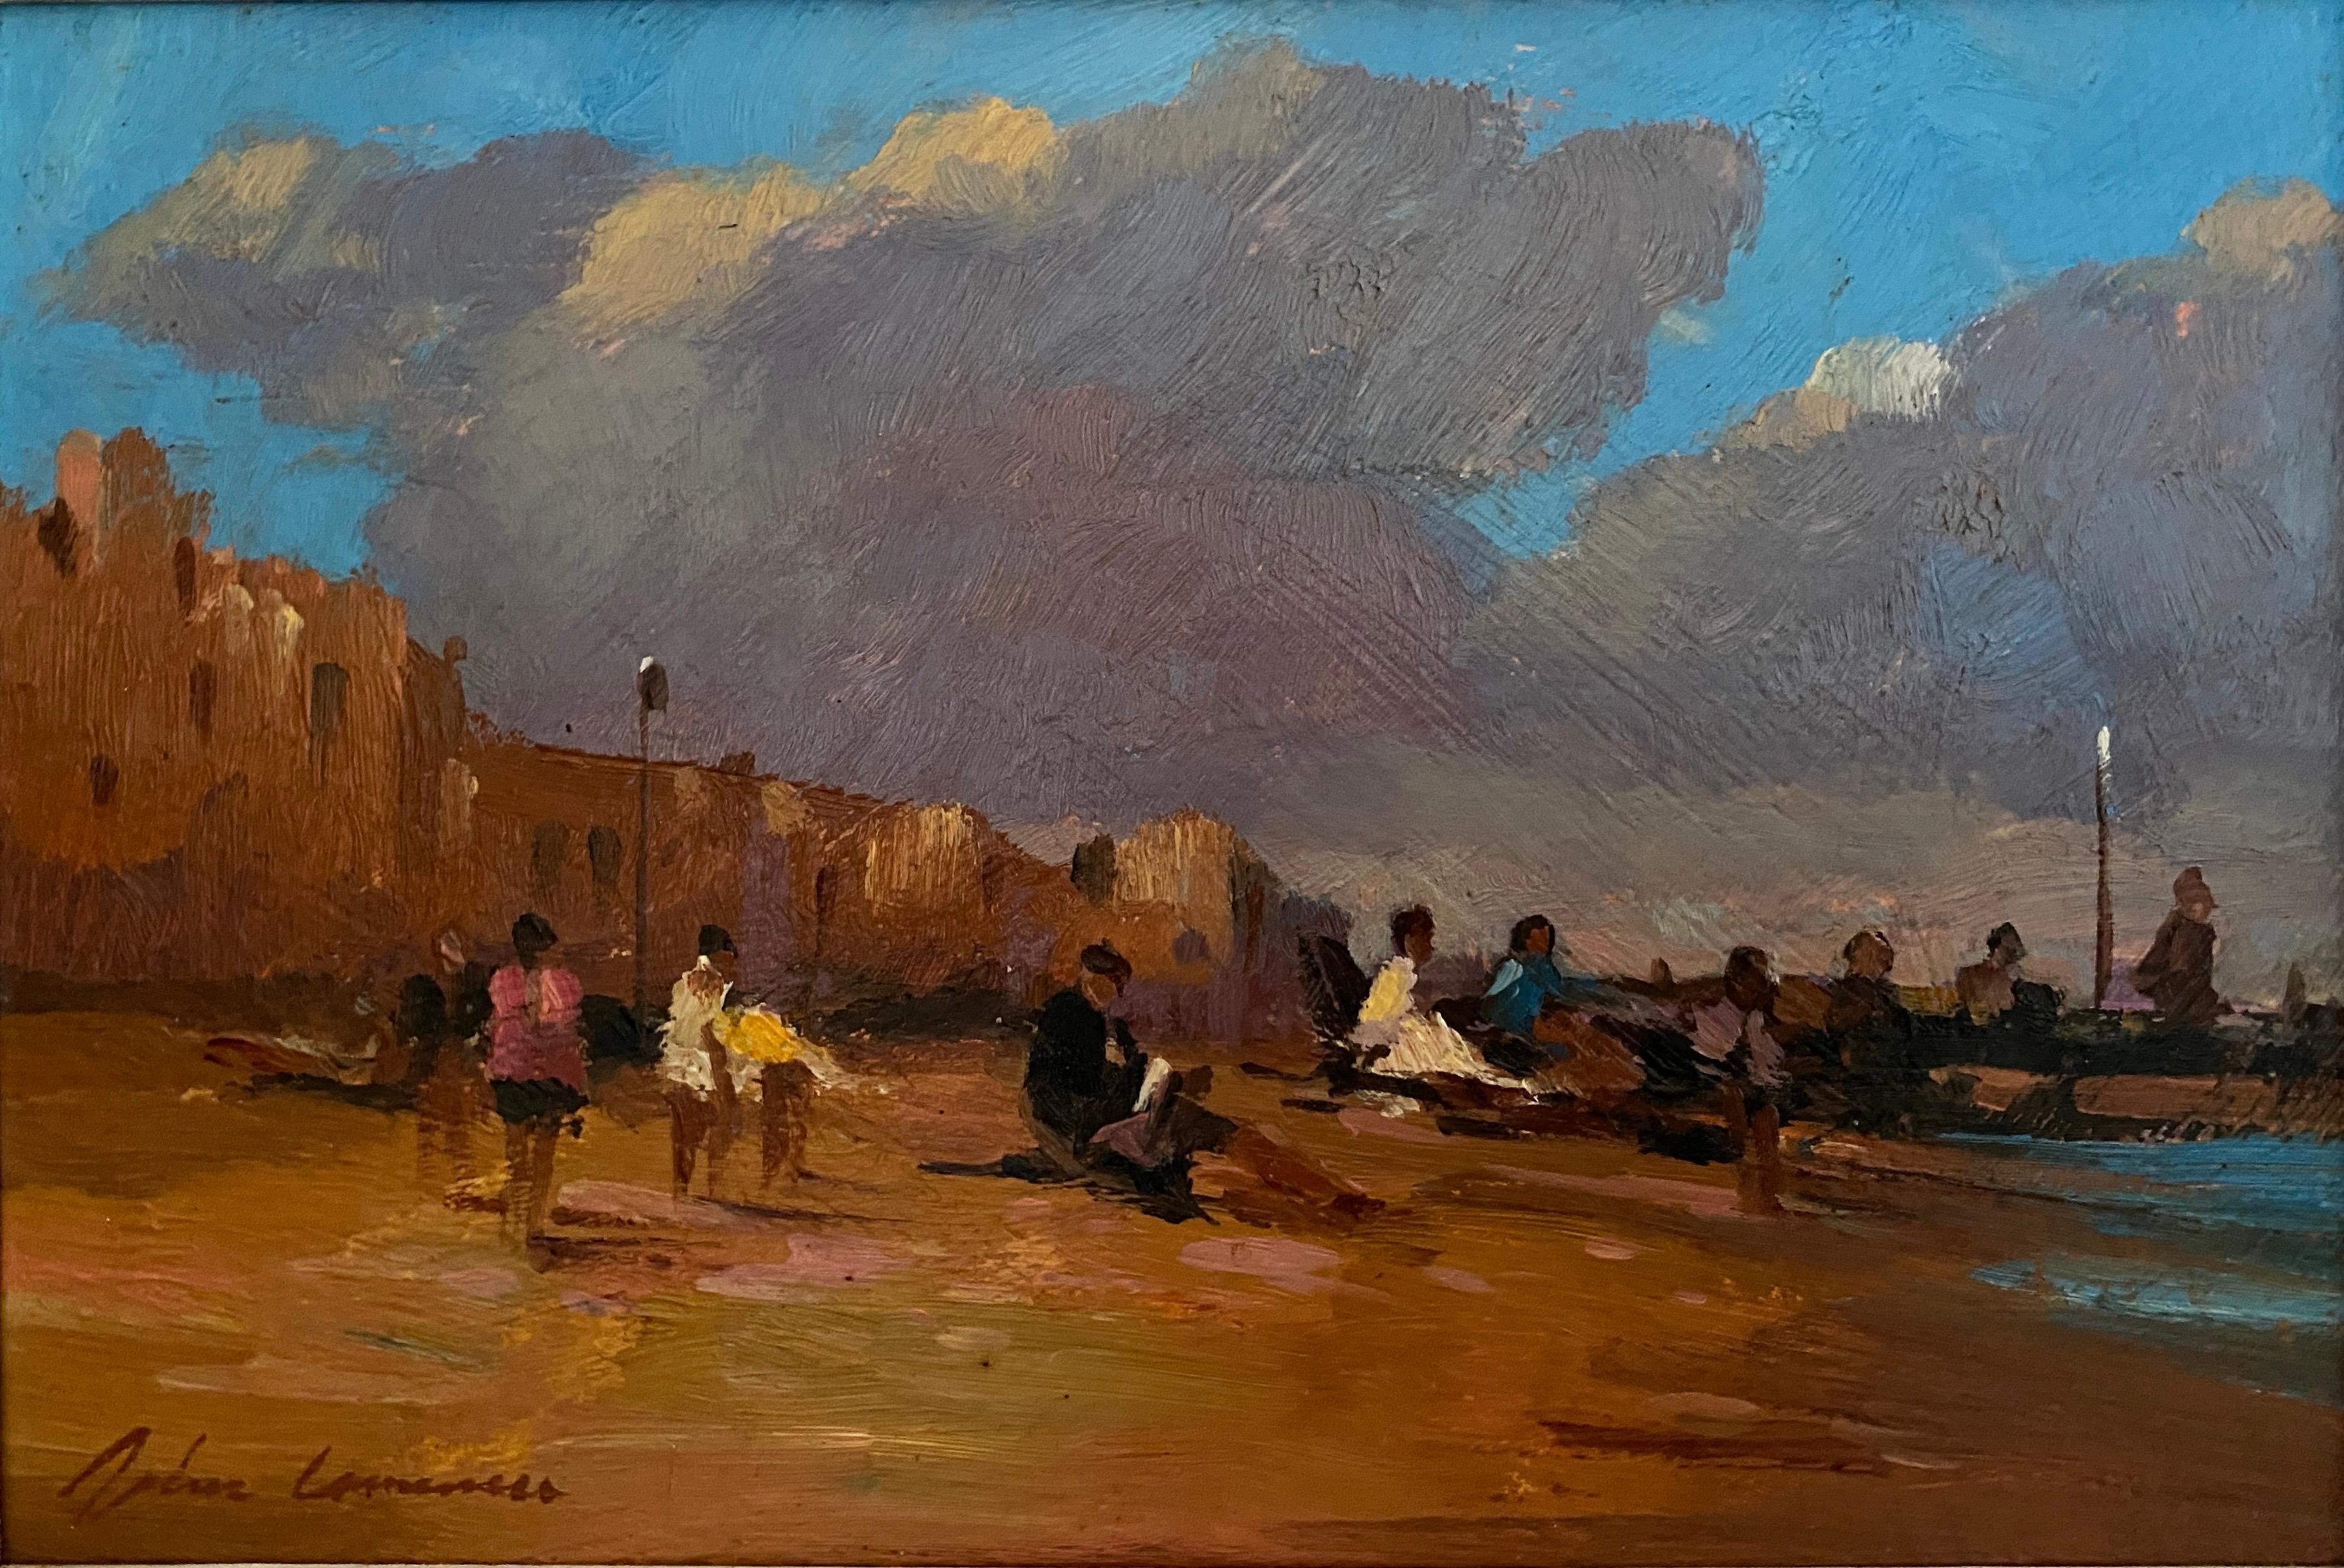 "Weekend at the seaside". Post-Impressionist classic beach scene. Oil on panel